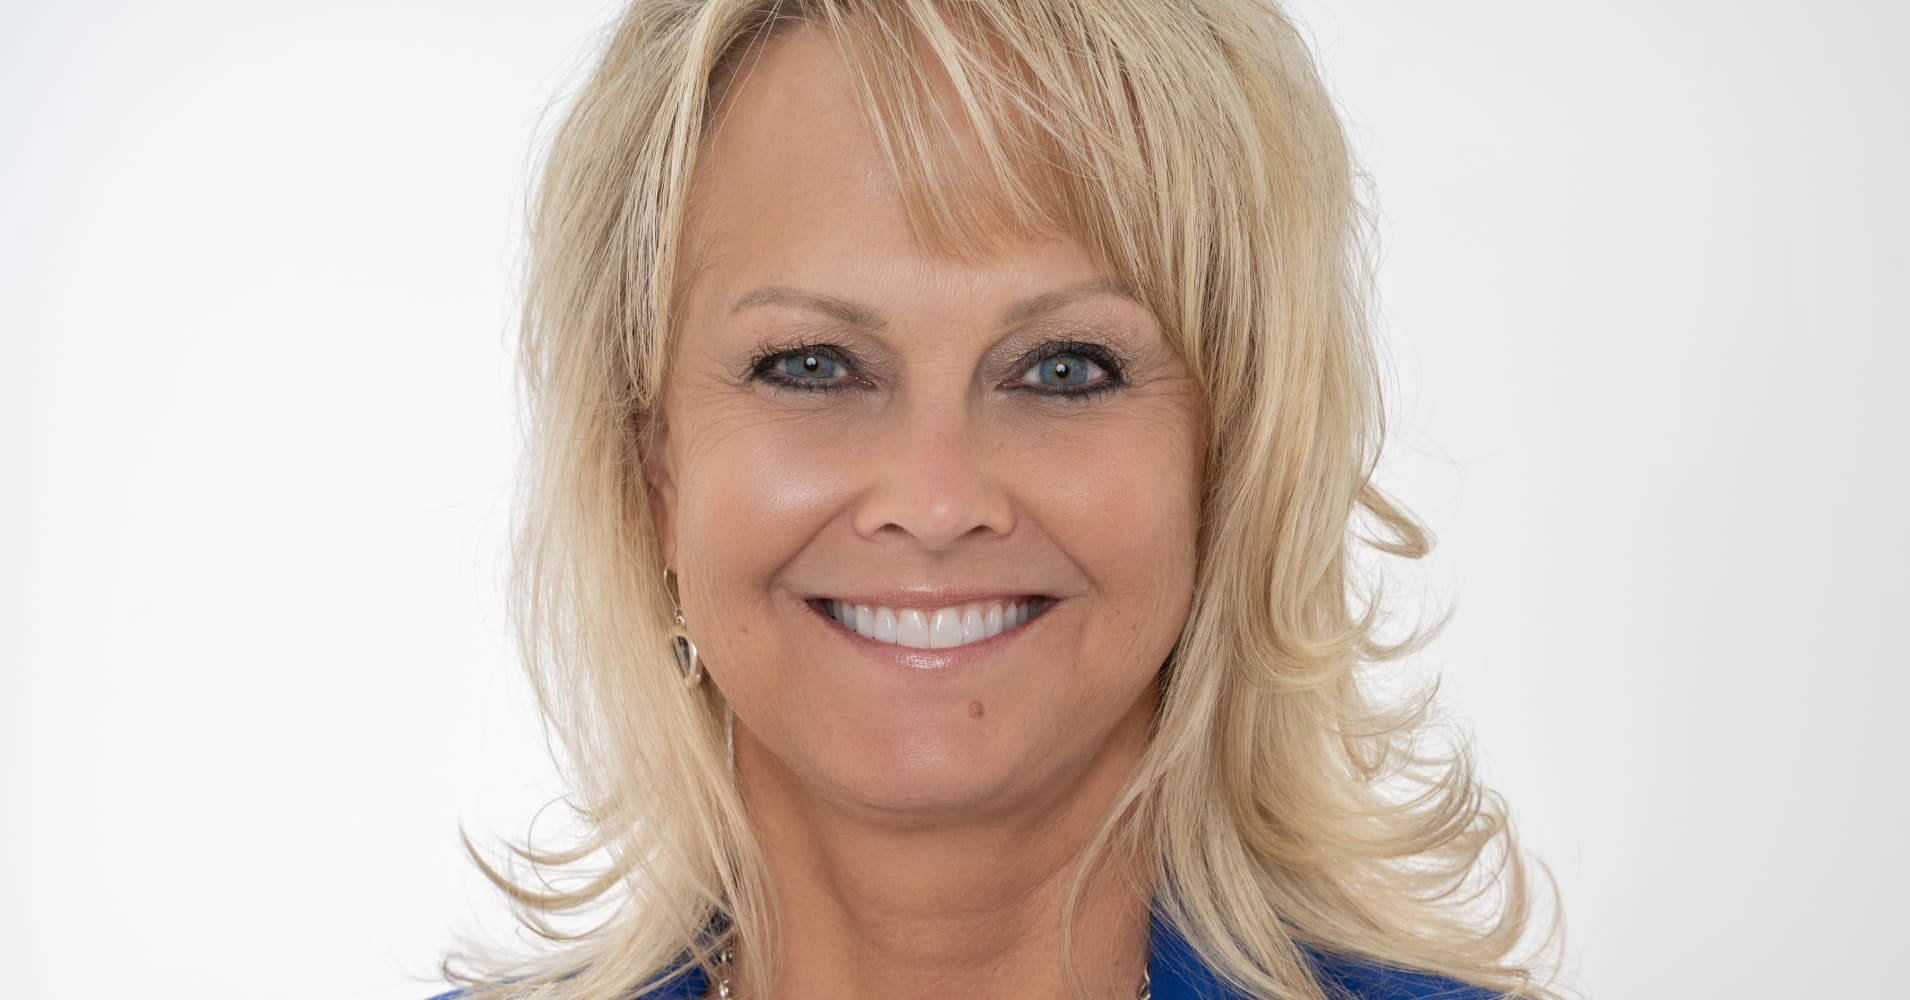 National Association of Realtors president says she is resigning after ...